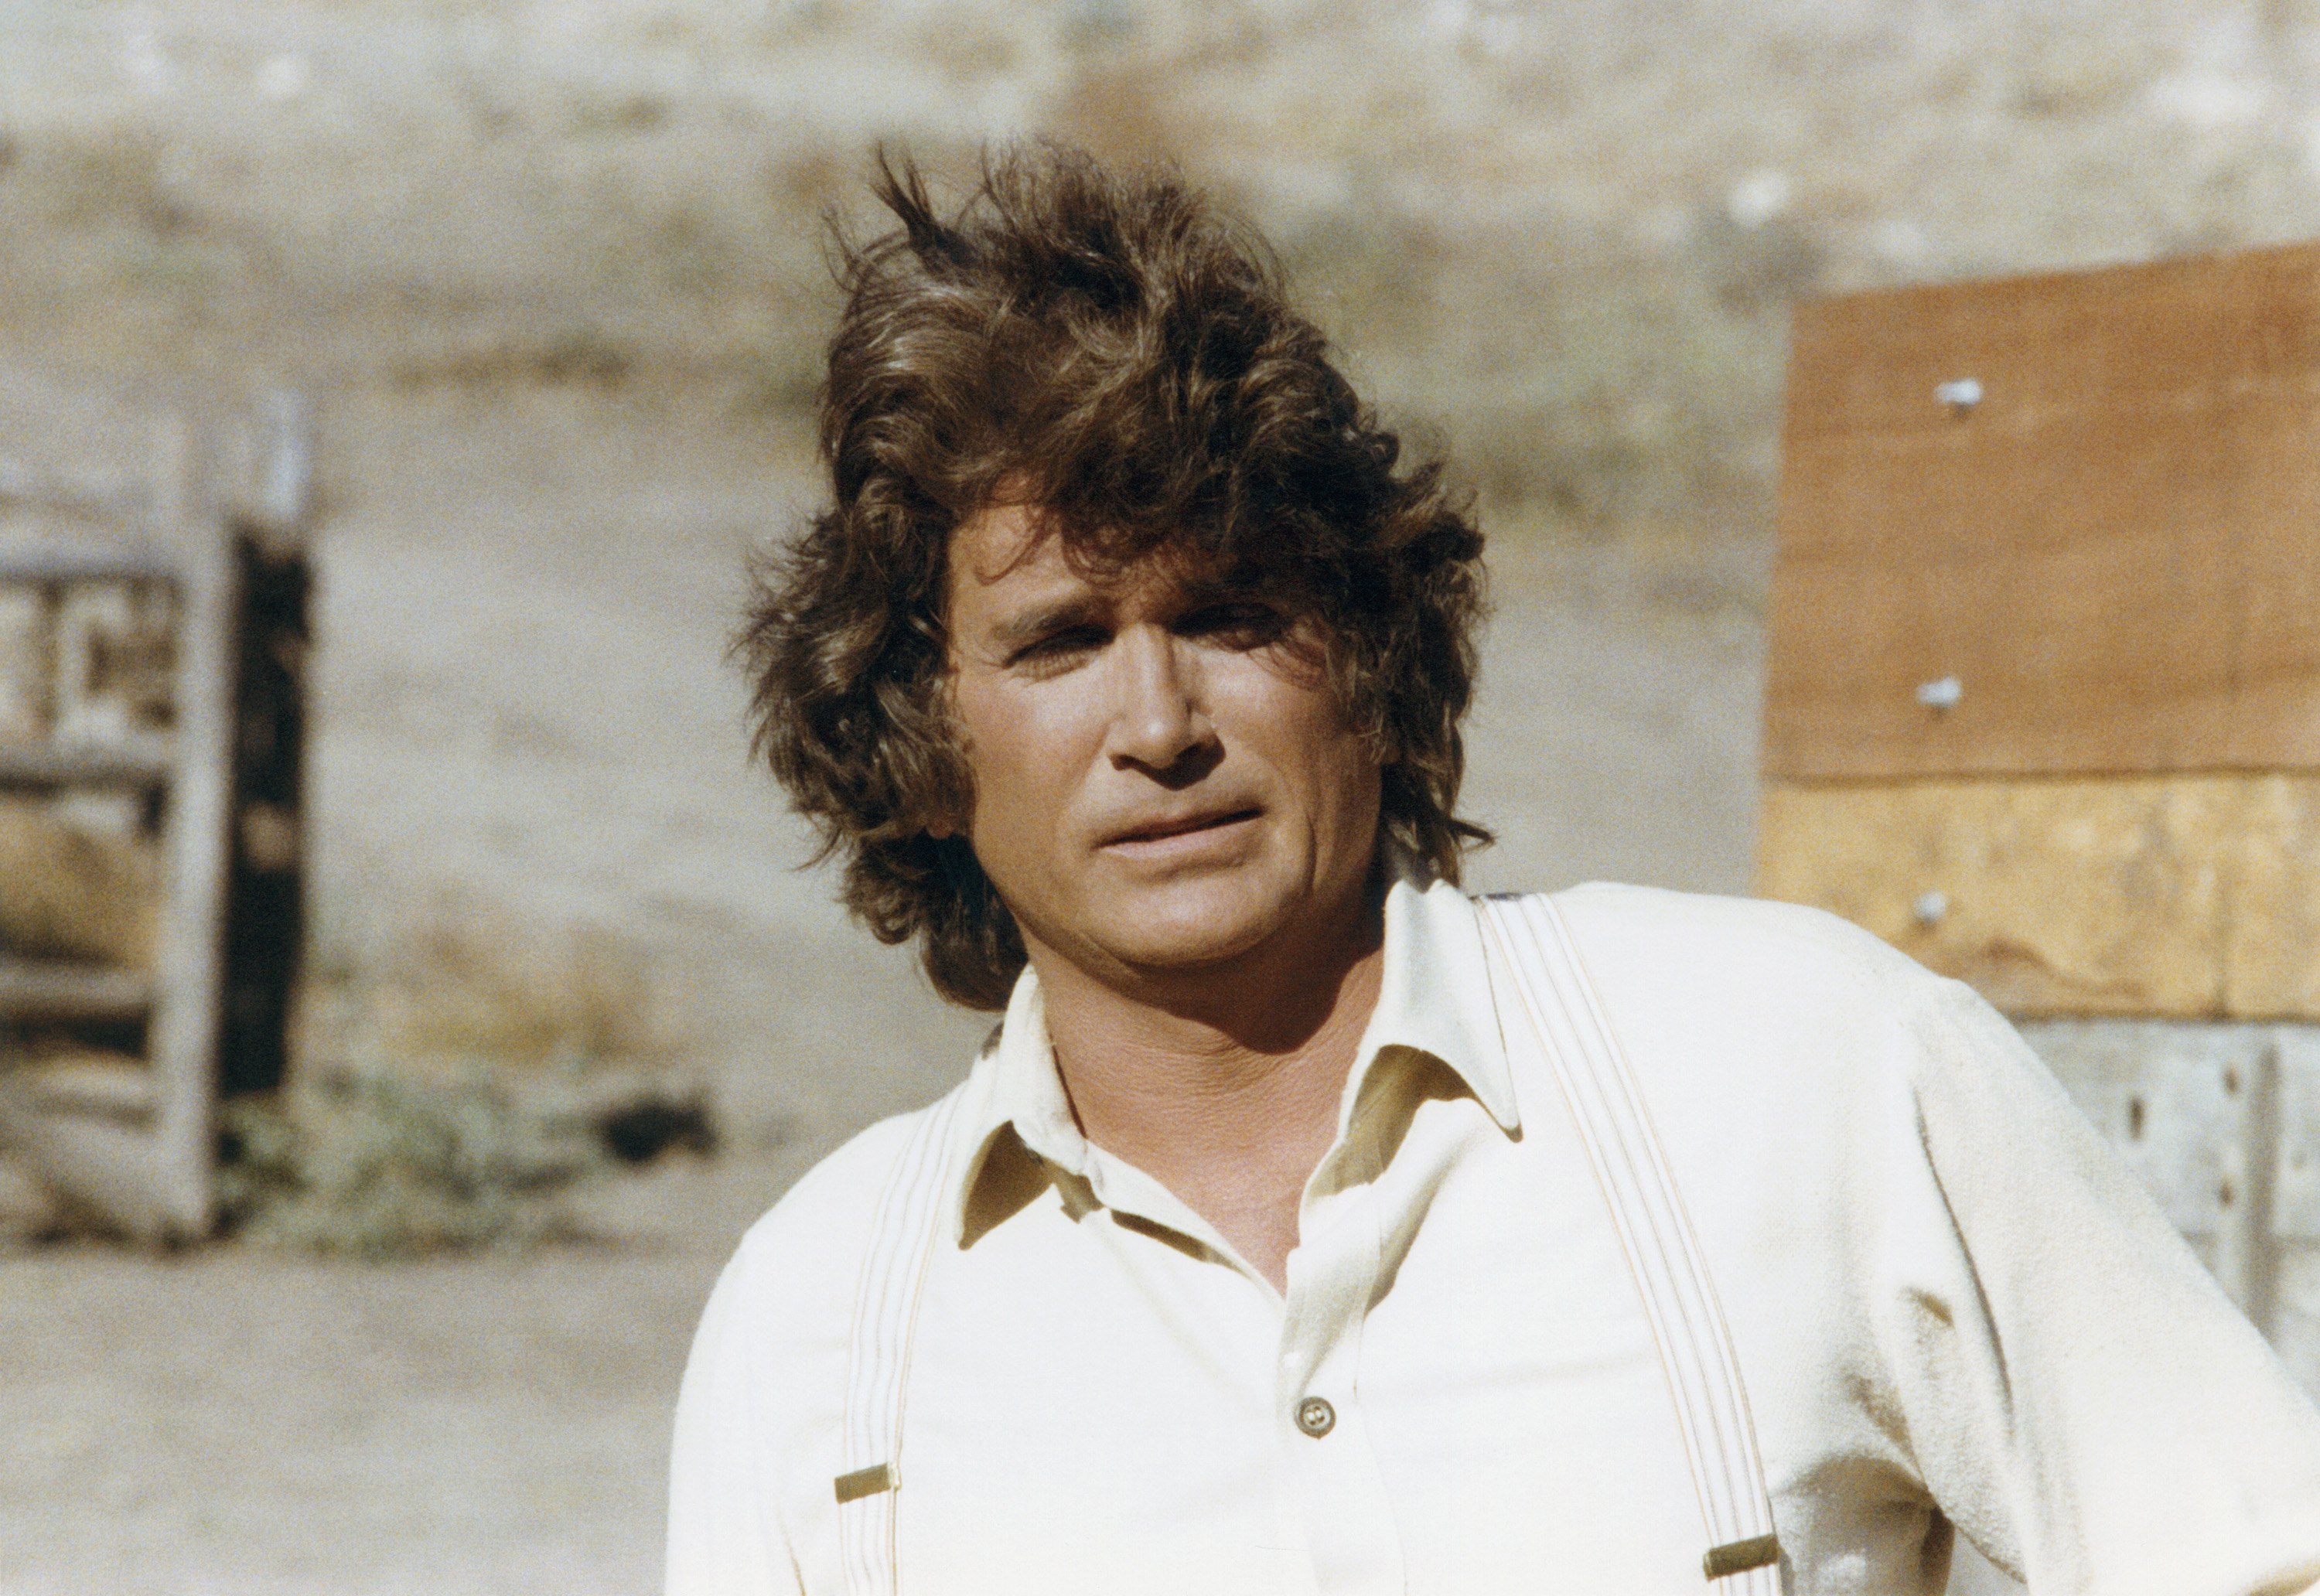 Michael Landon as Charles Ingalls on Little House on the Prairie | NBCU Photo Bank